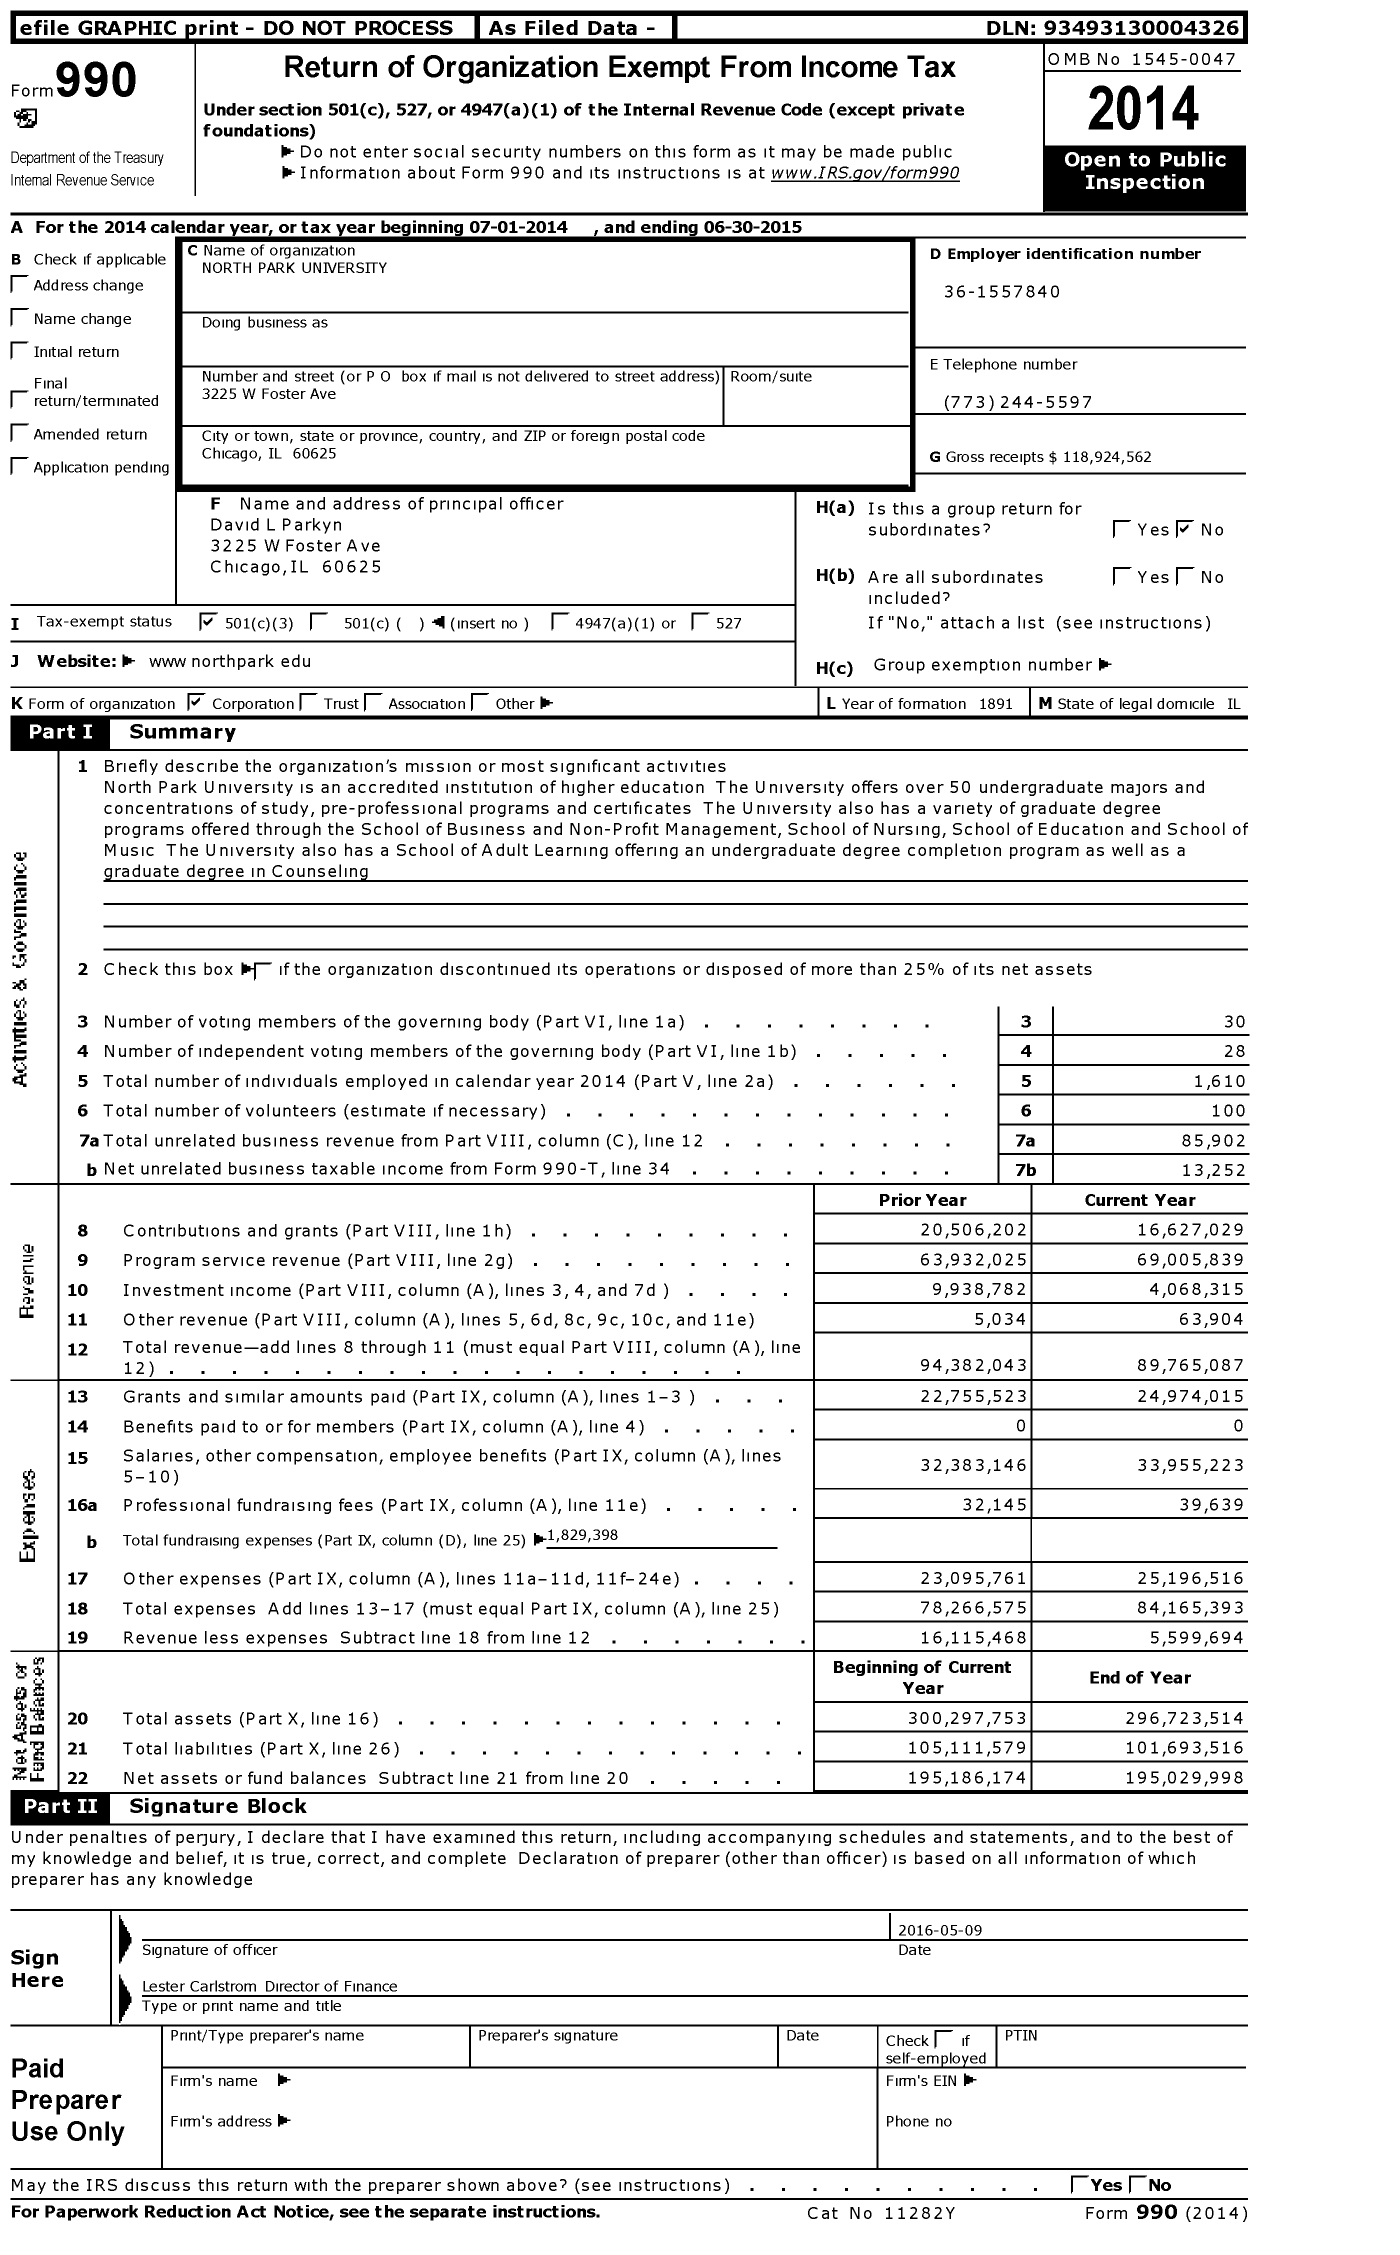 Image of first page of 2014 Form 990 for North Park University (NPU)